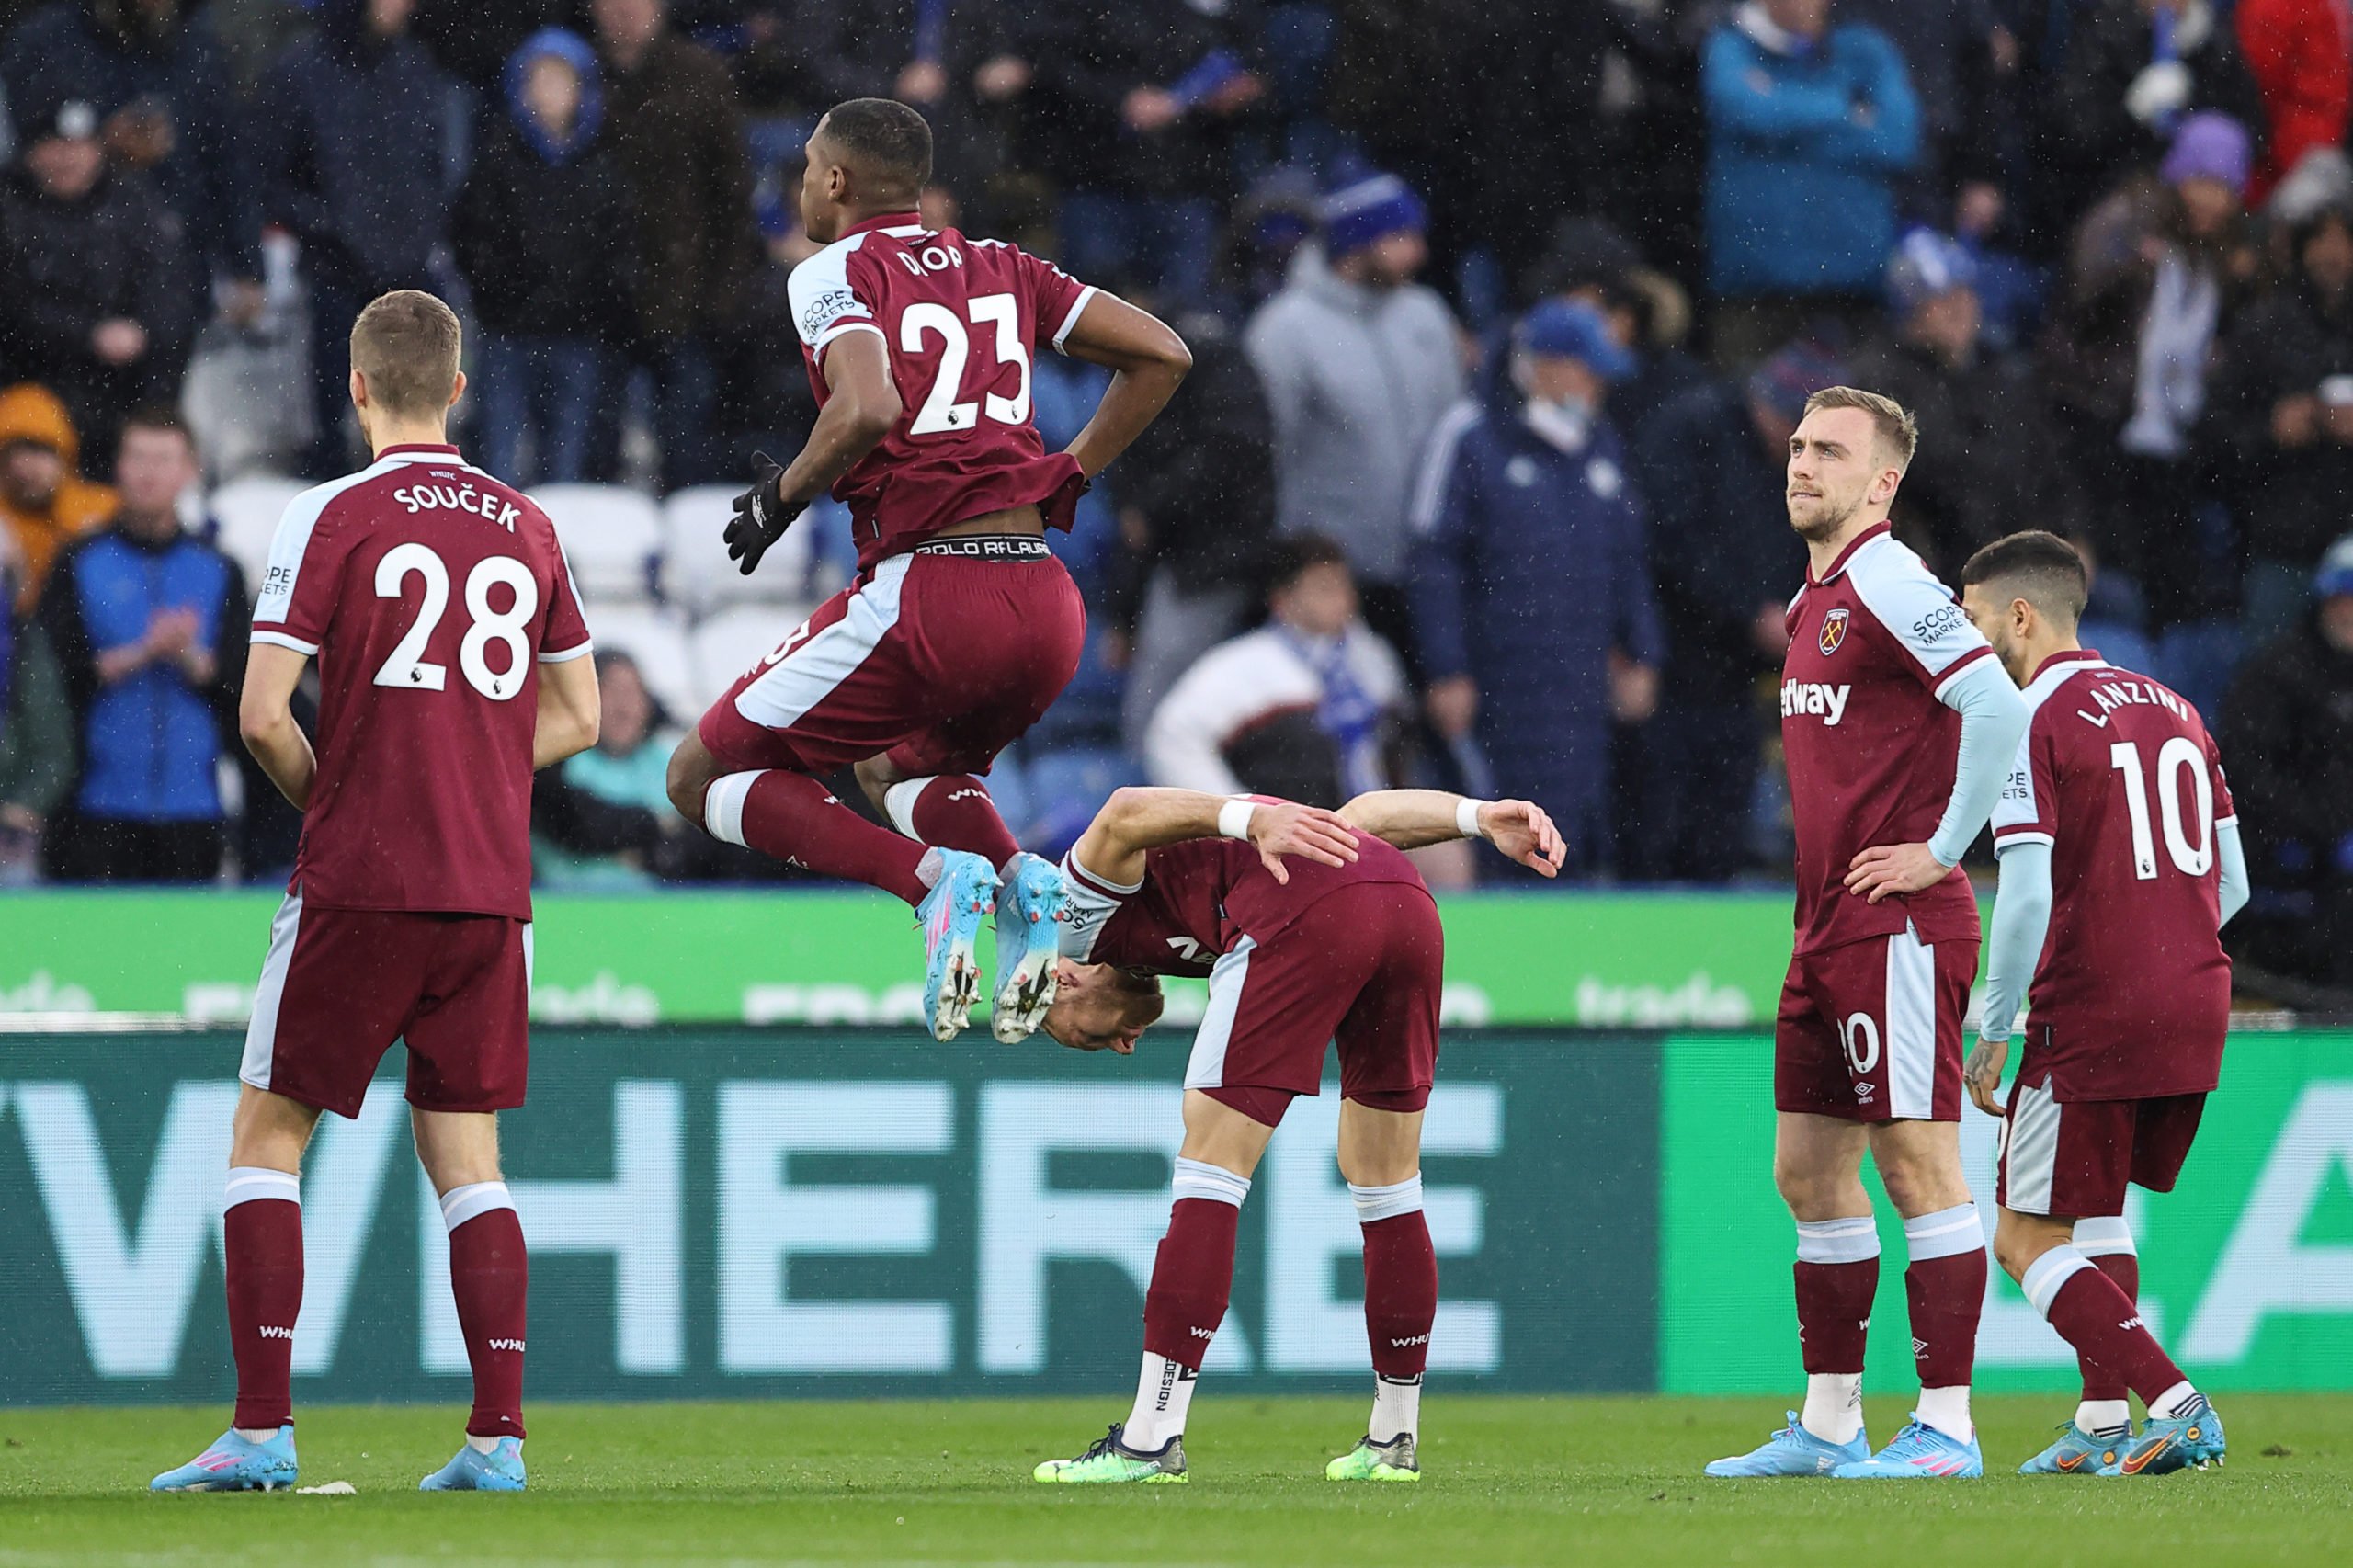 'Masterclass': West Ham fans blown away by £25 million ace's unreal display against Leicester